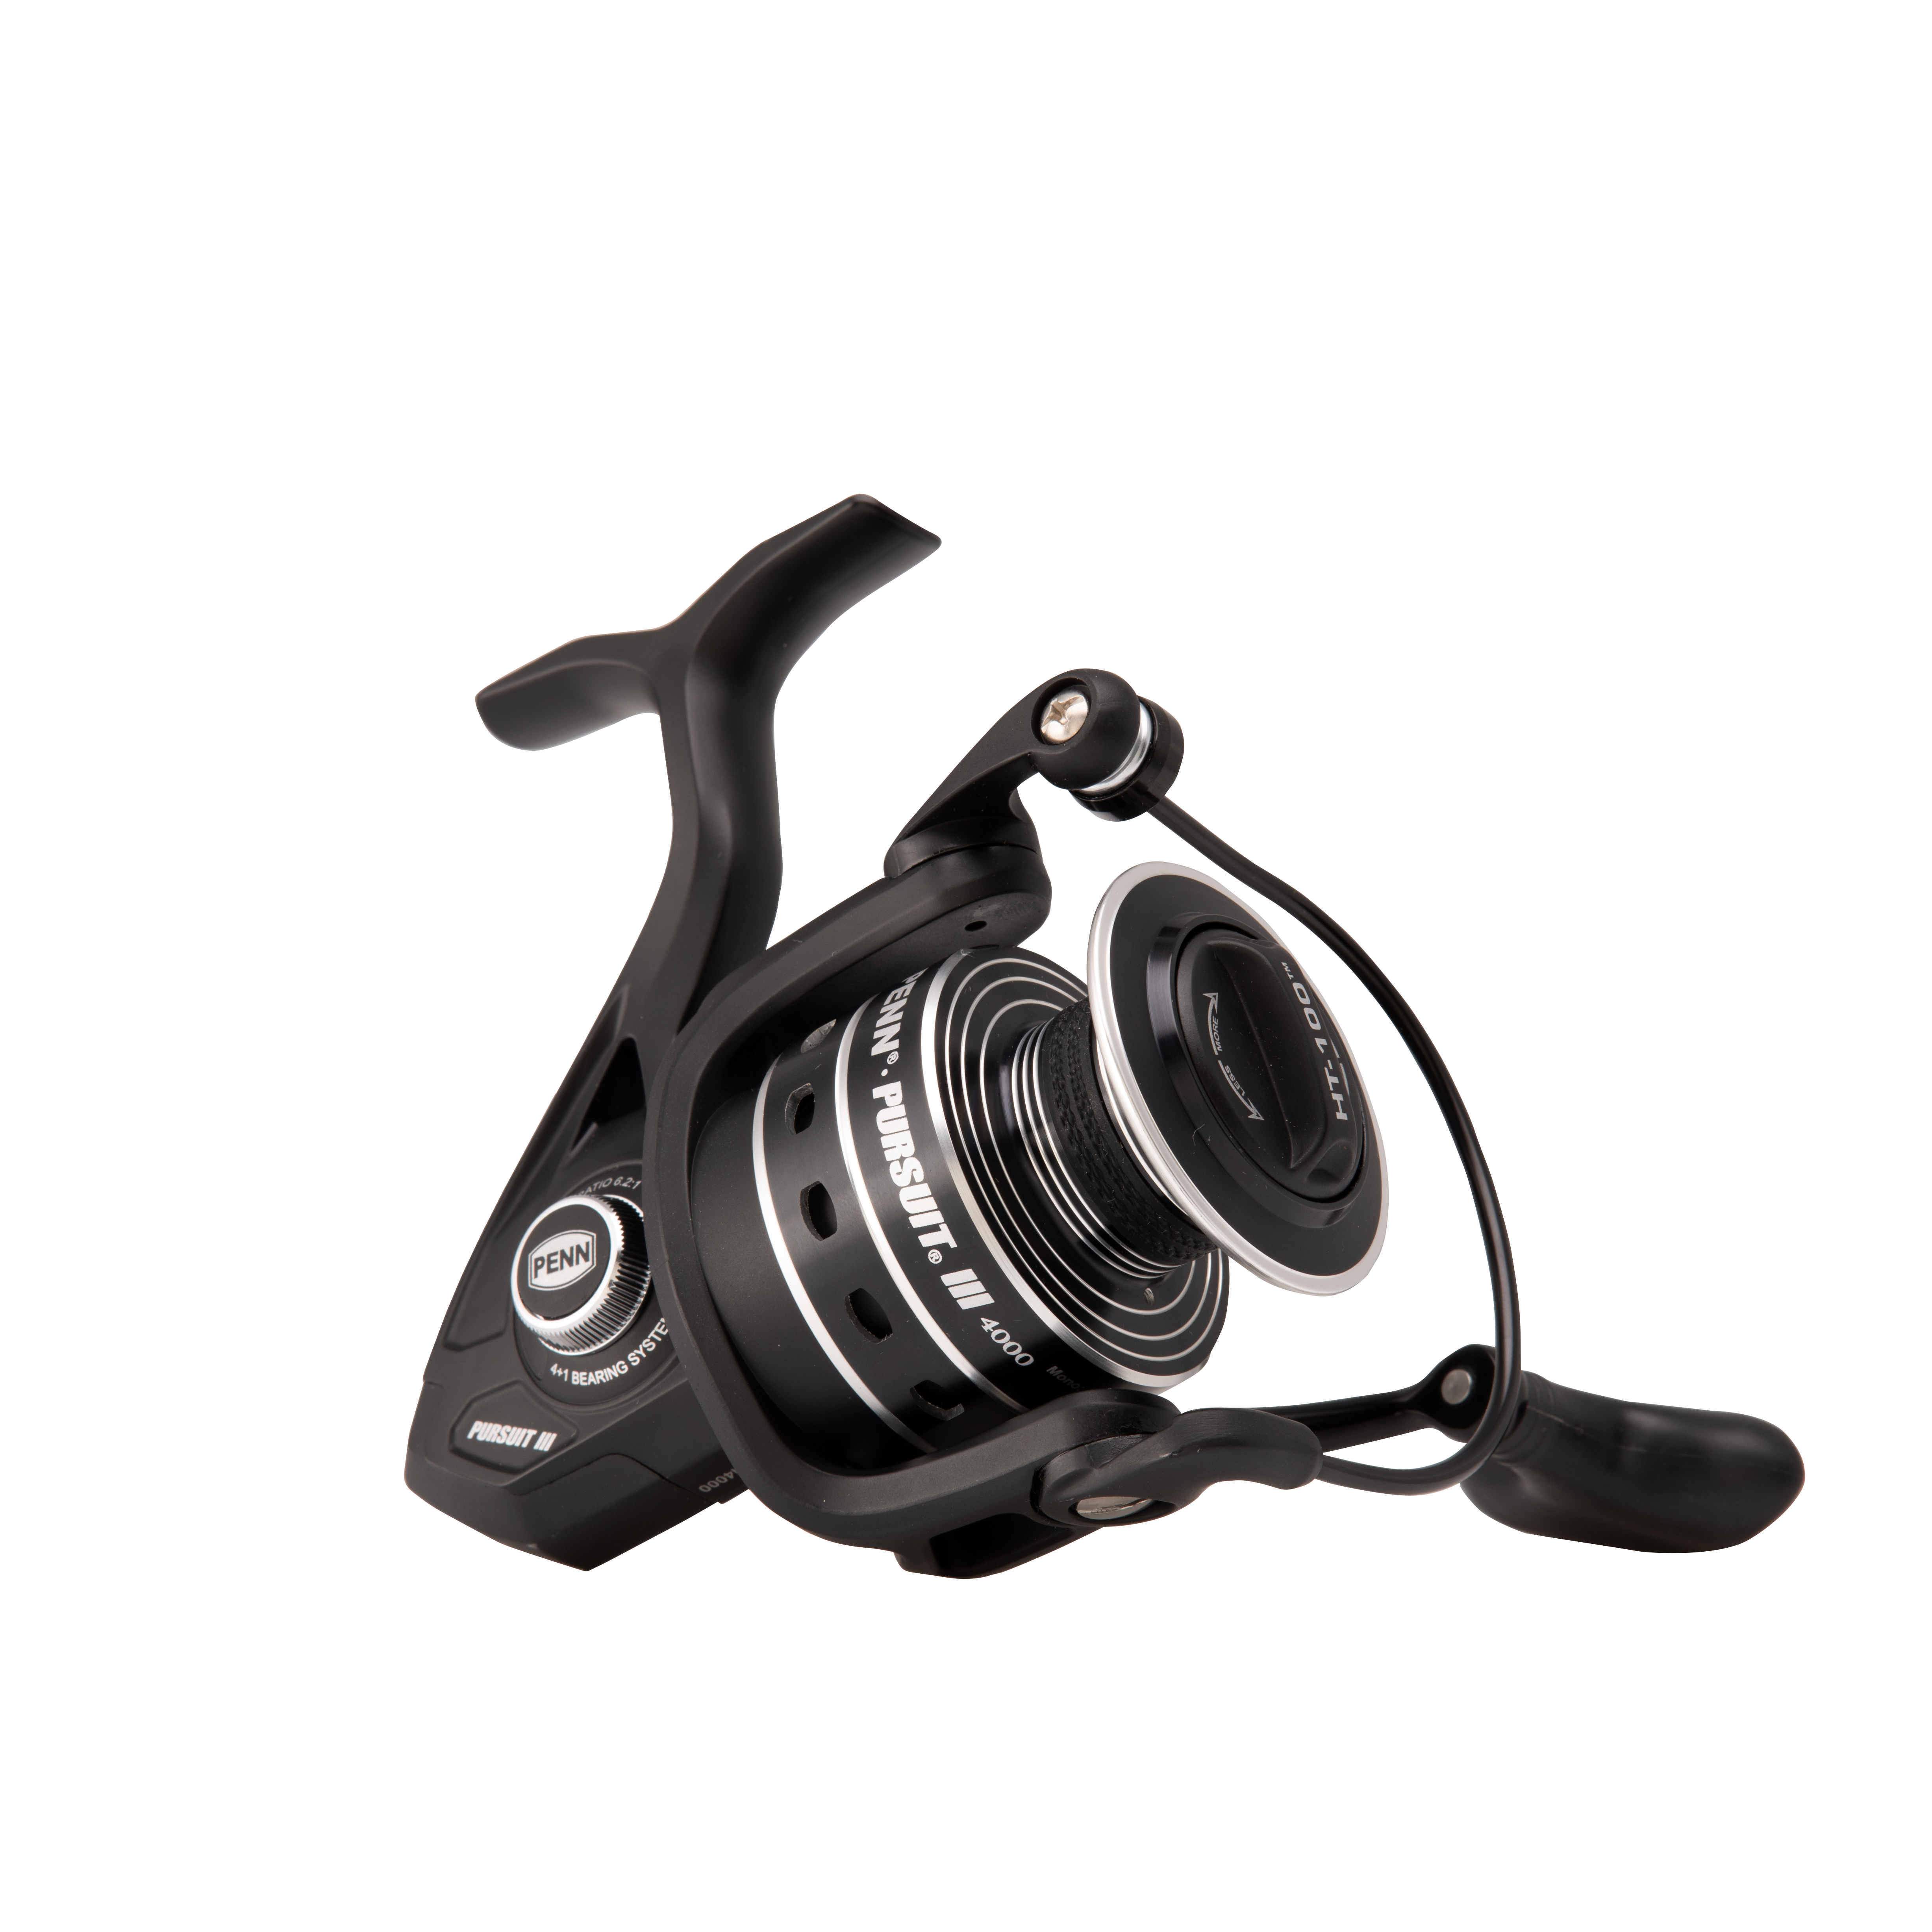 Brand New Penn Pursuit III 3 Spinning Reels All Sizes Available 